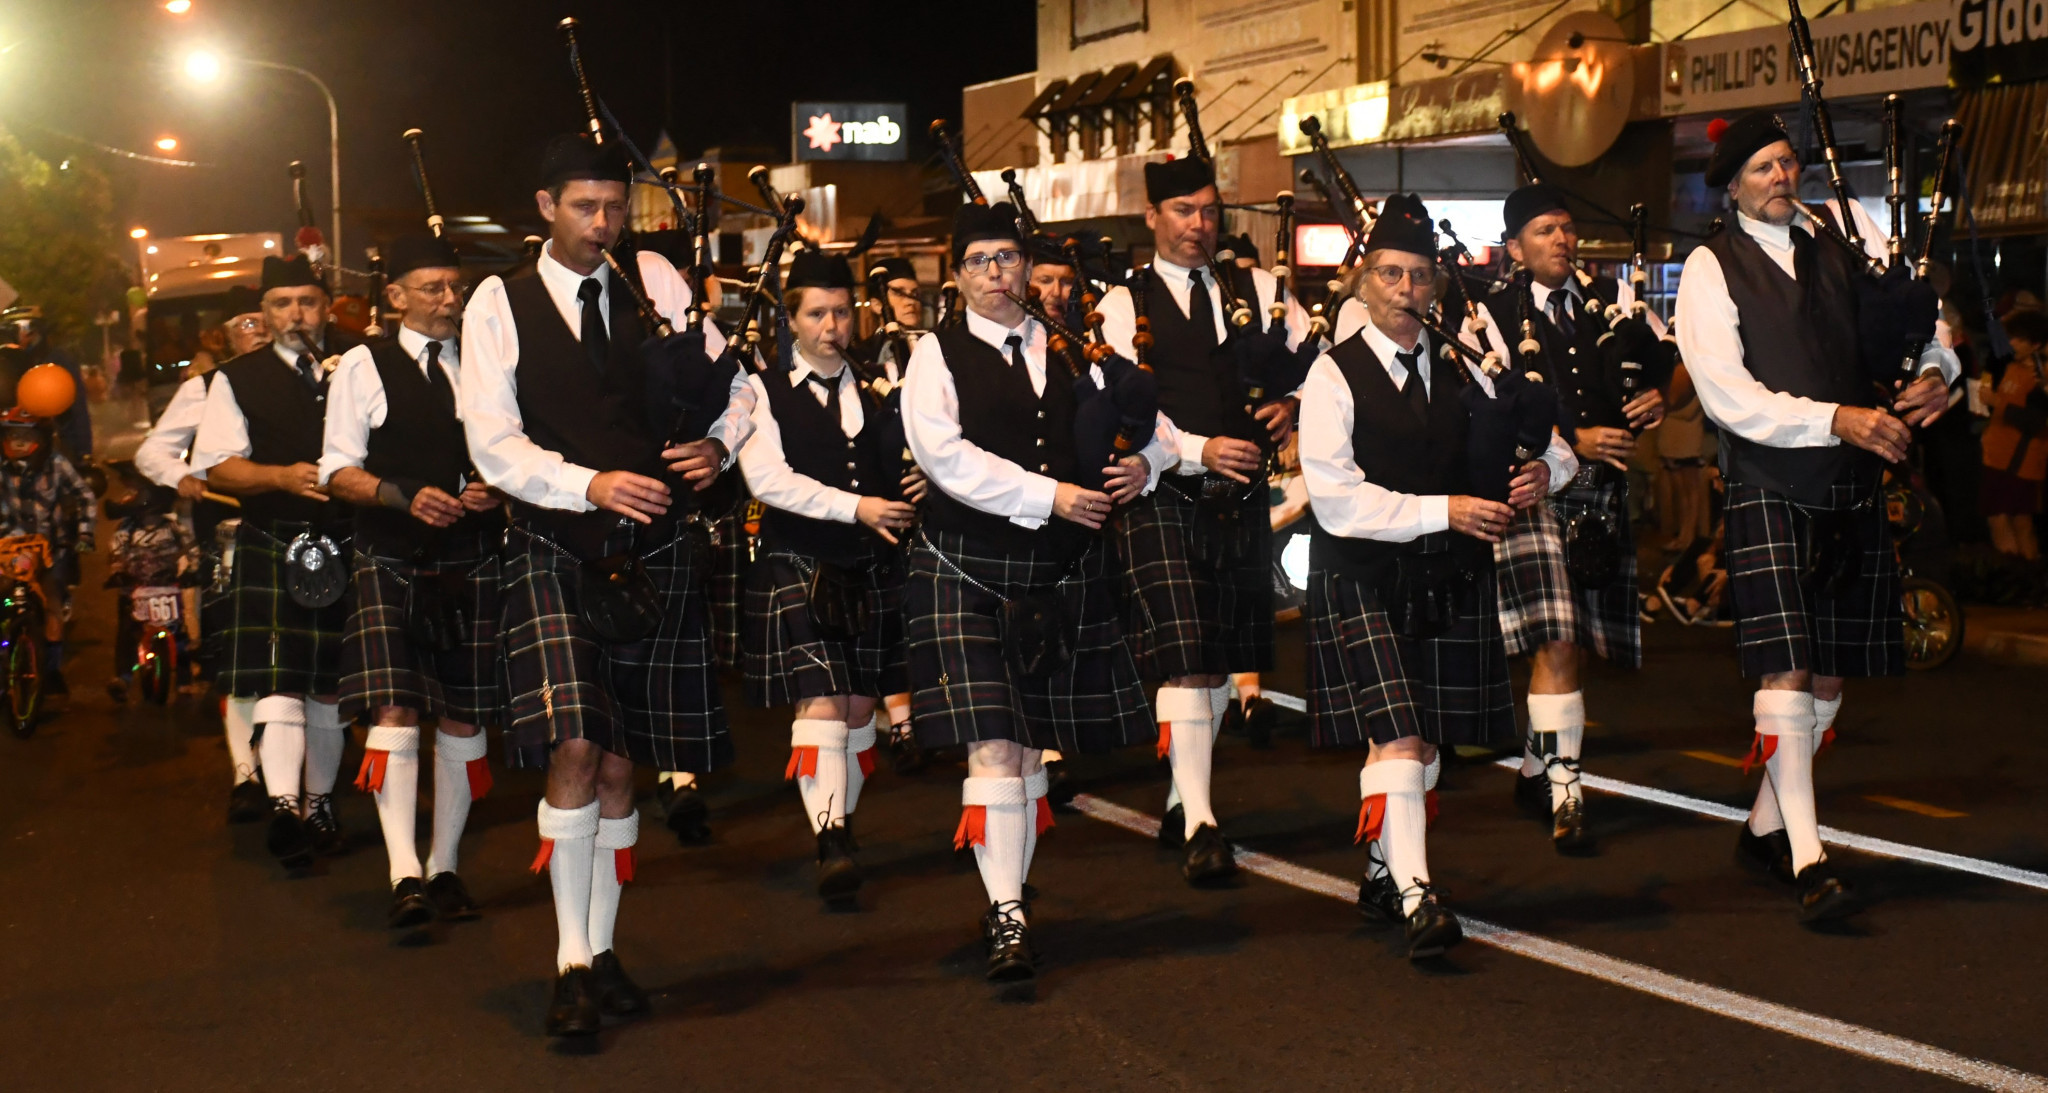 The United Tablelands Pipe Band played in the street parade.